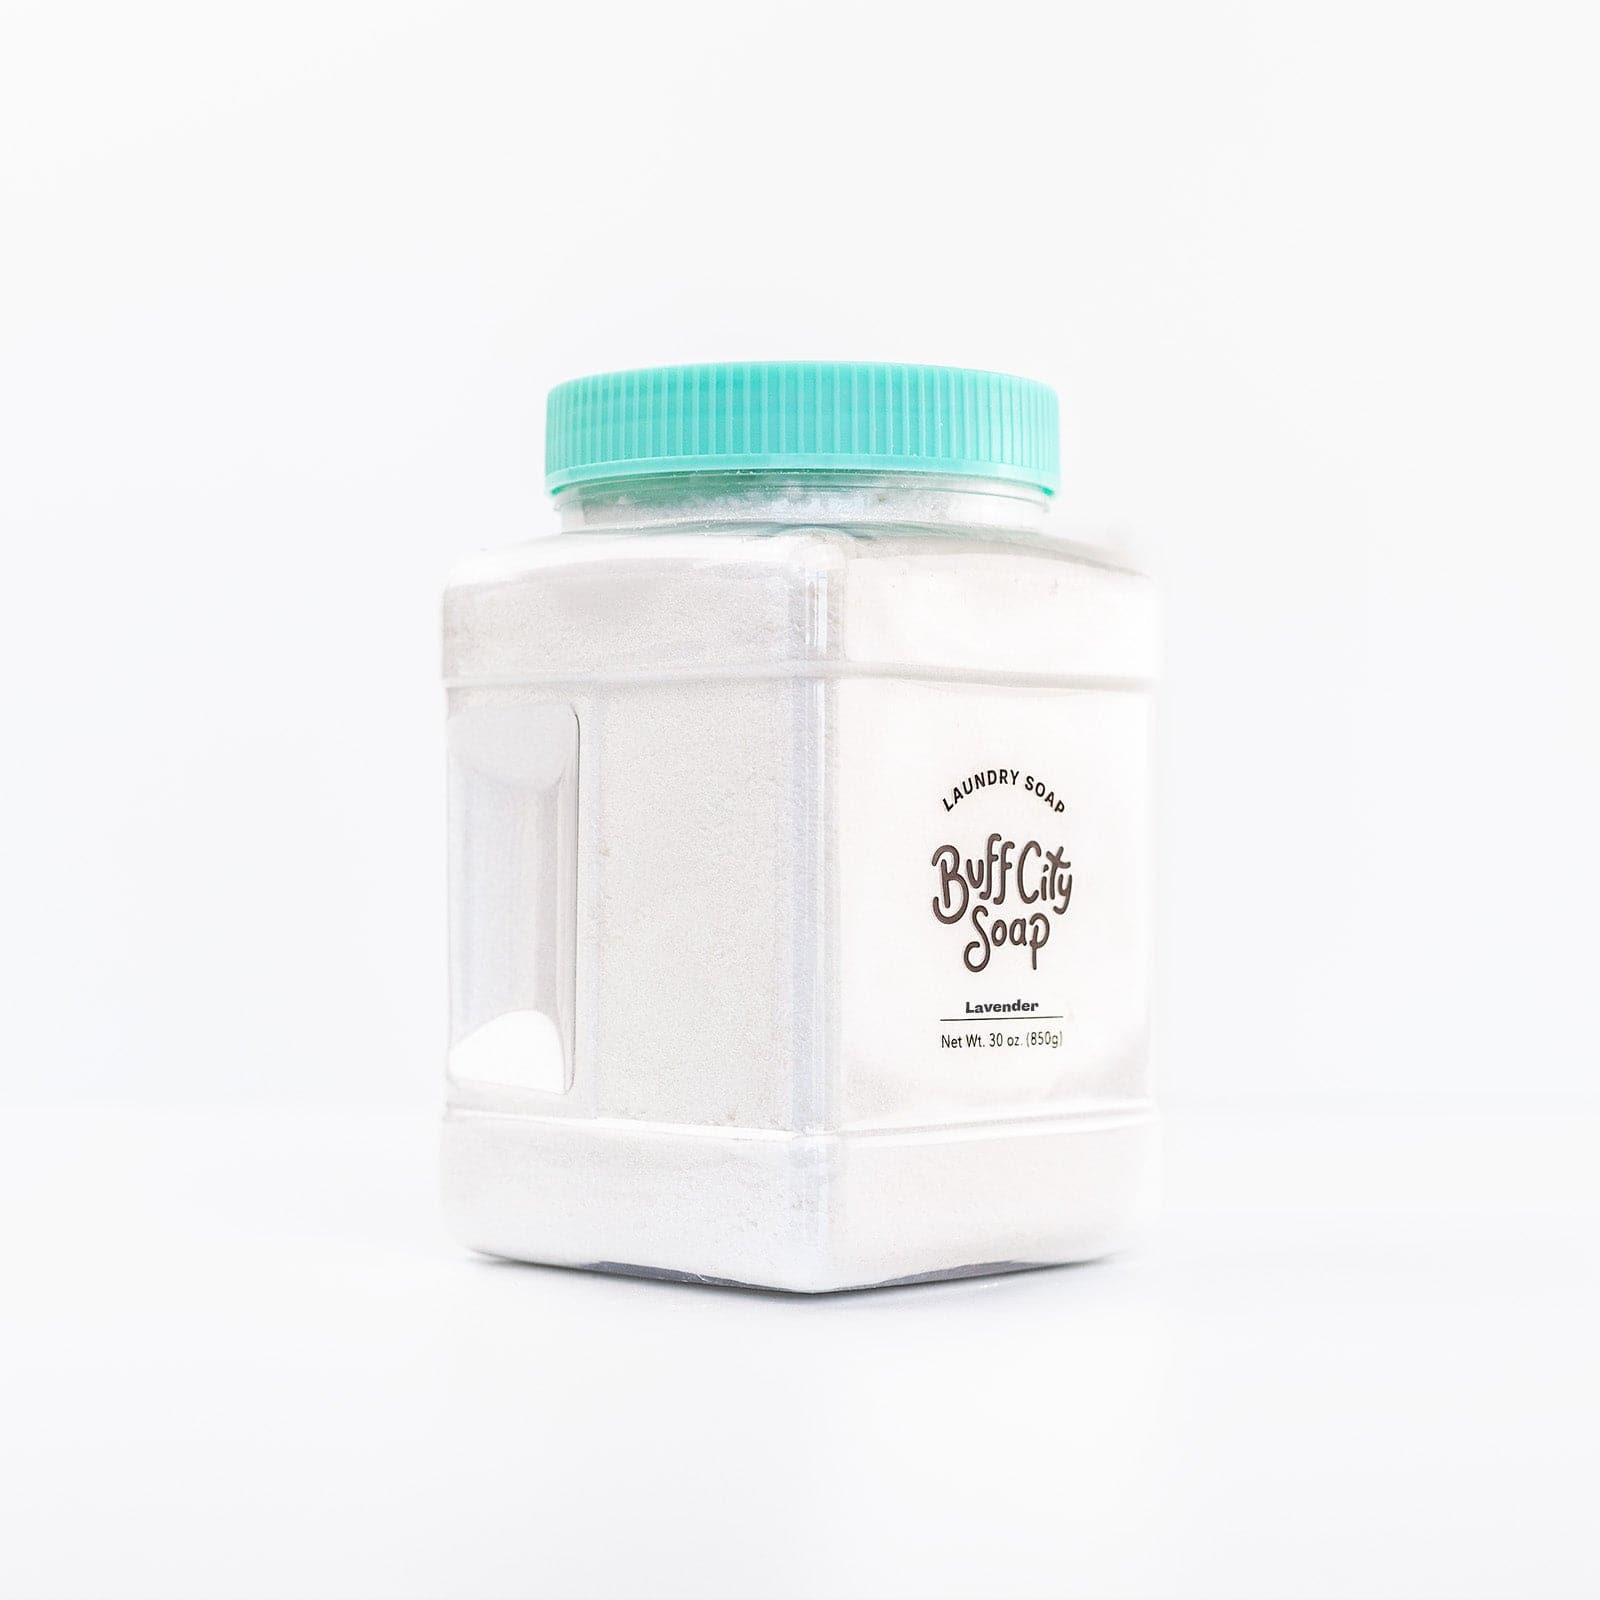 Clear plastic container of Buff City Soap's lavender scented laundry soap with a teal lid 